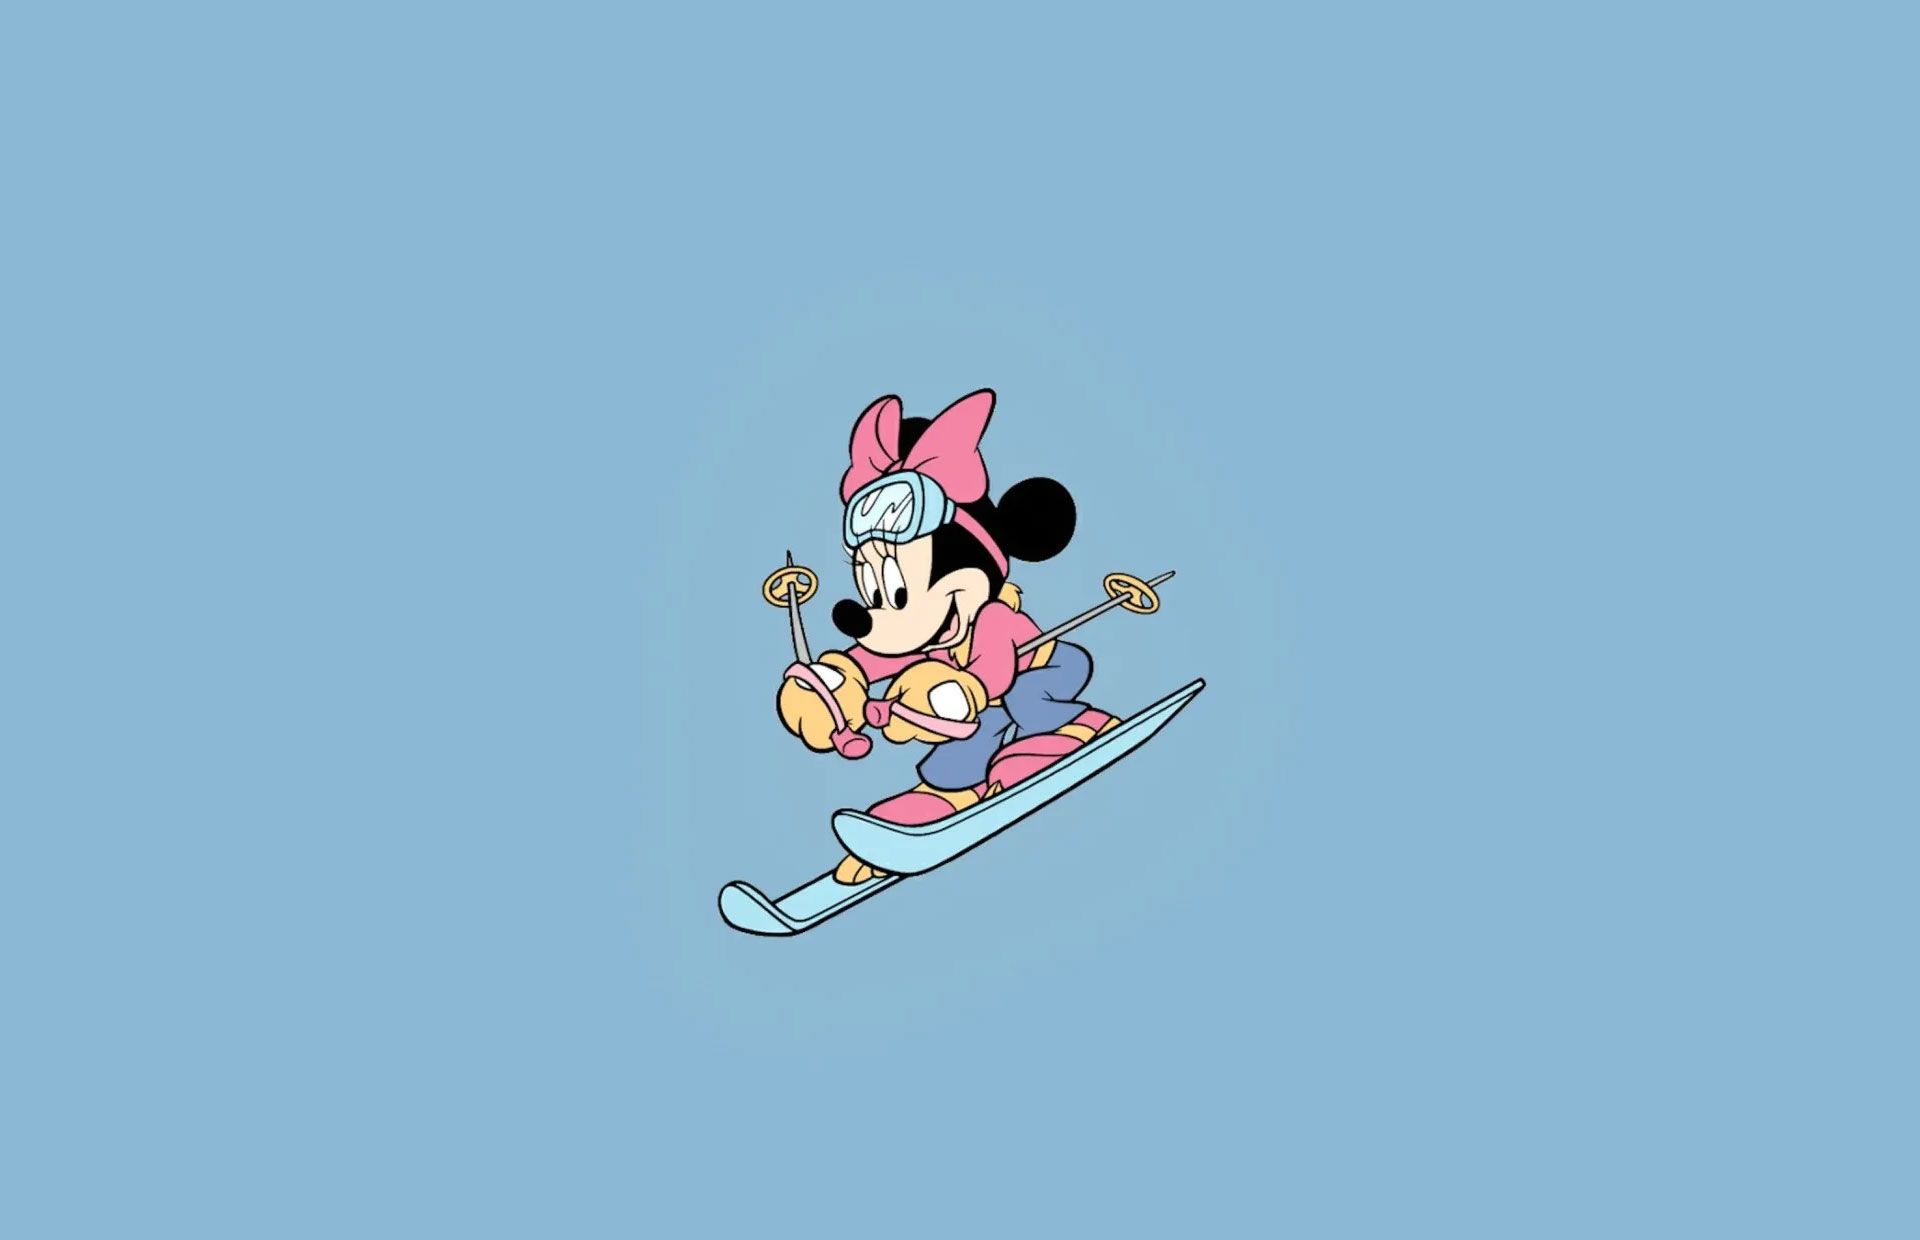 Mickey Mouse skiing in the air - Mickey Mouse